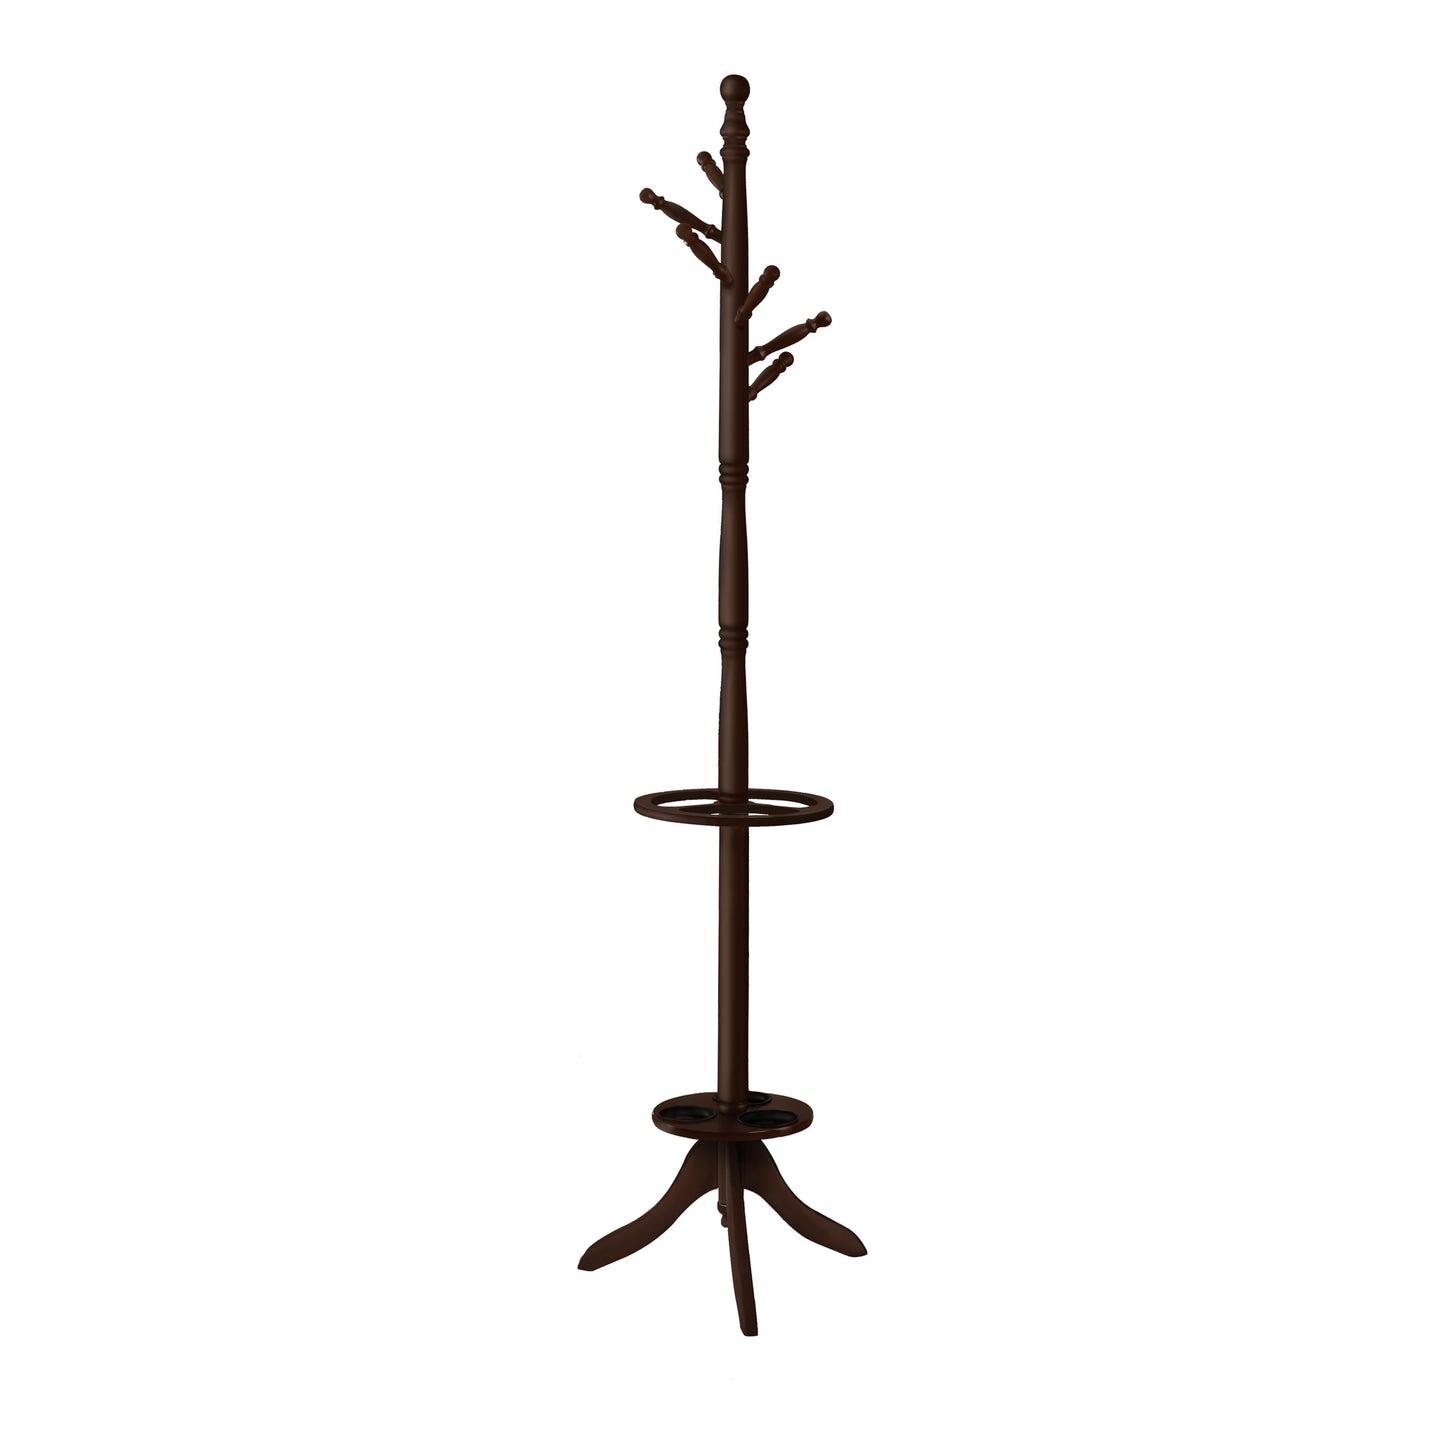 Monarch Specialties - Solid Wood Coat Rack in Cherry Finish with Umbrella Holder - I 2005